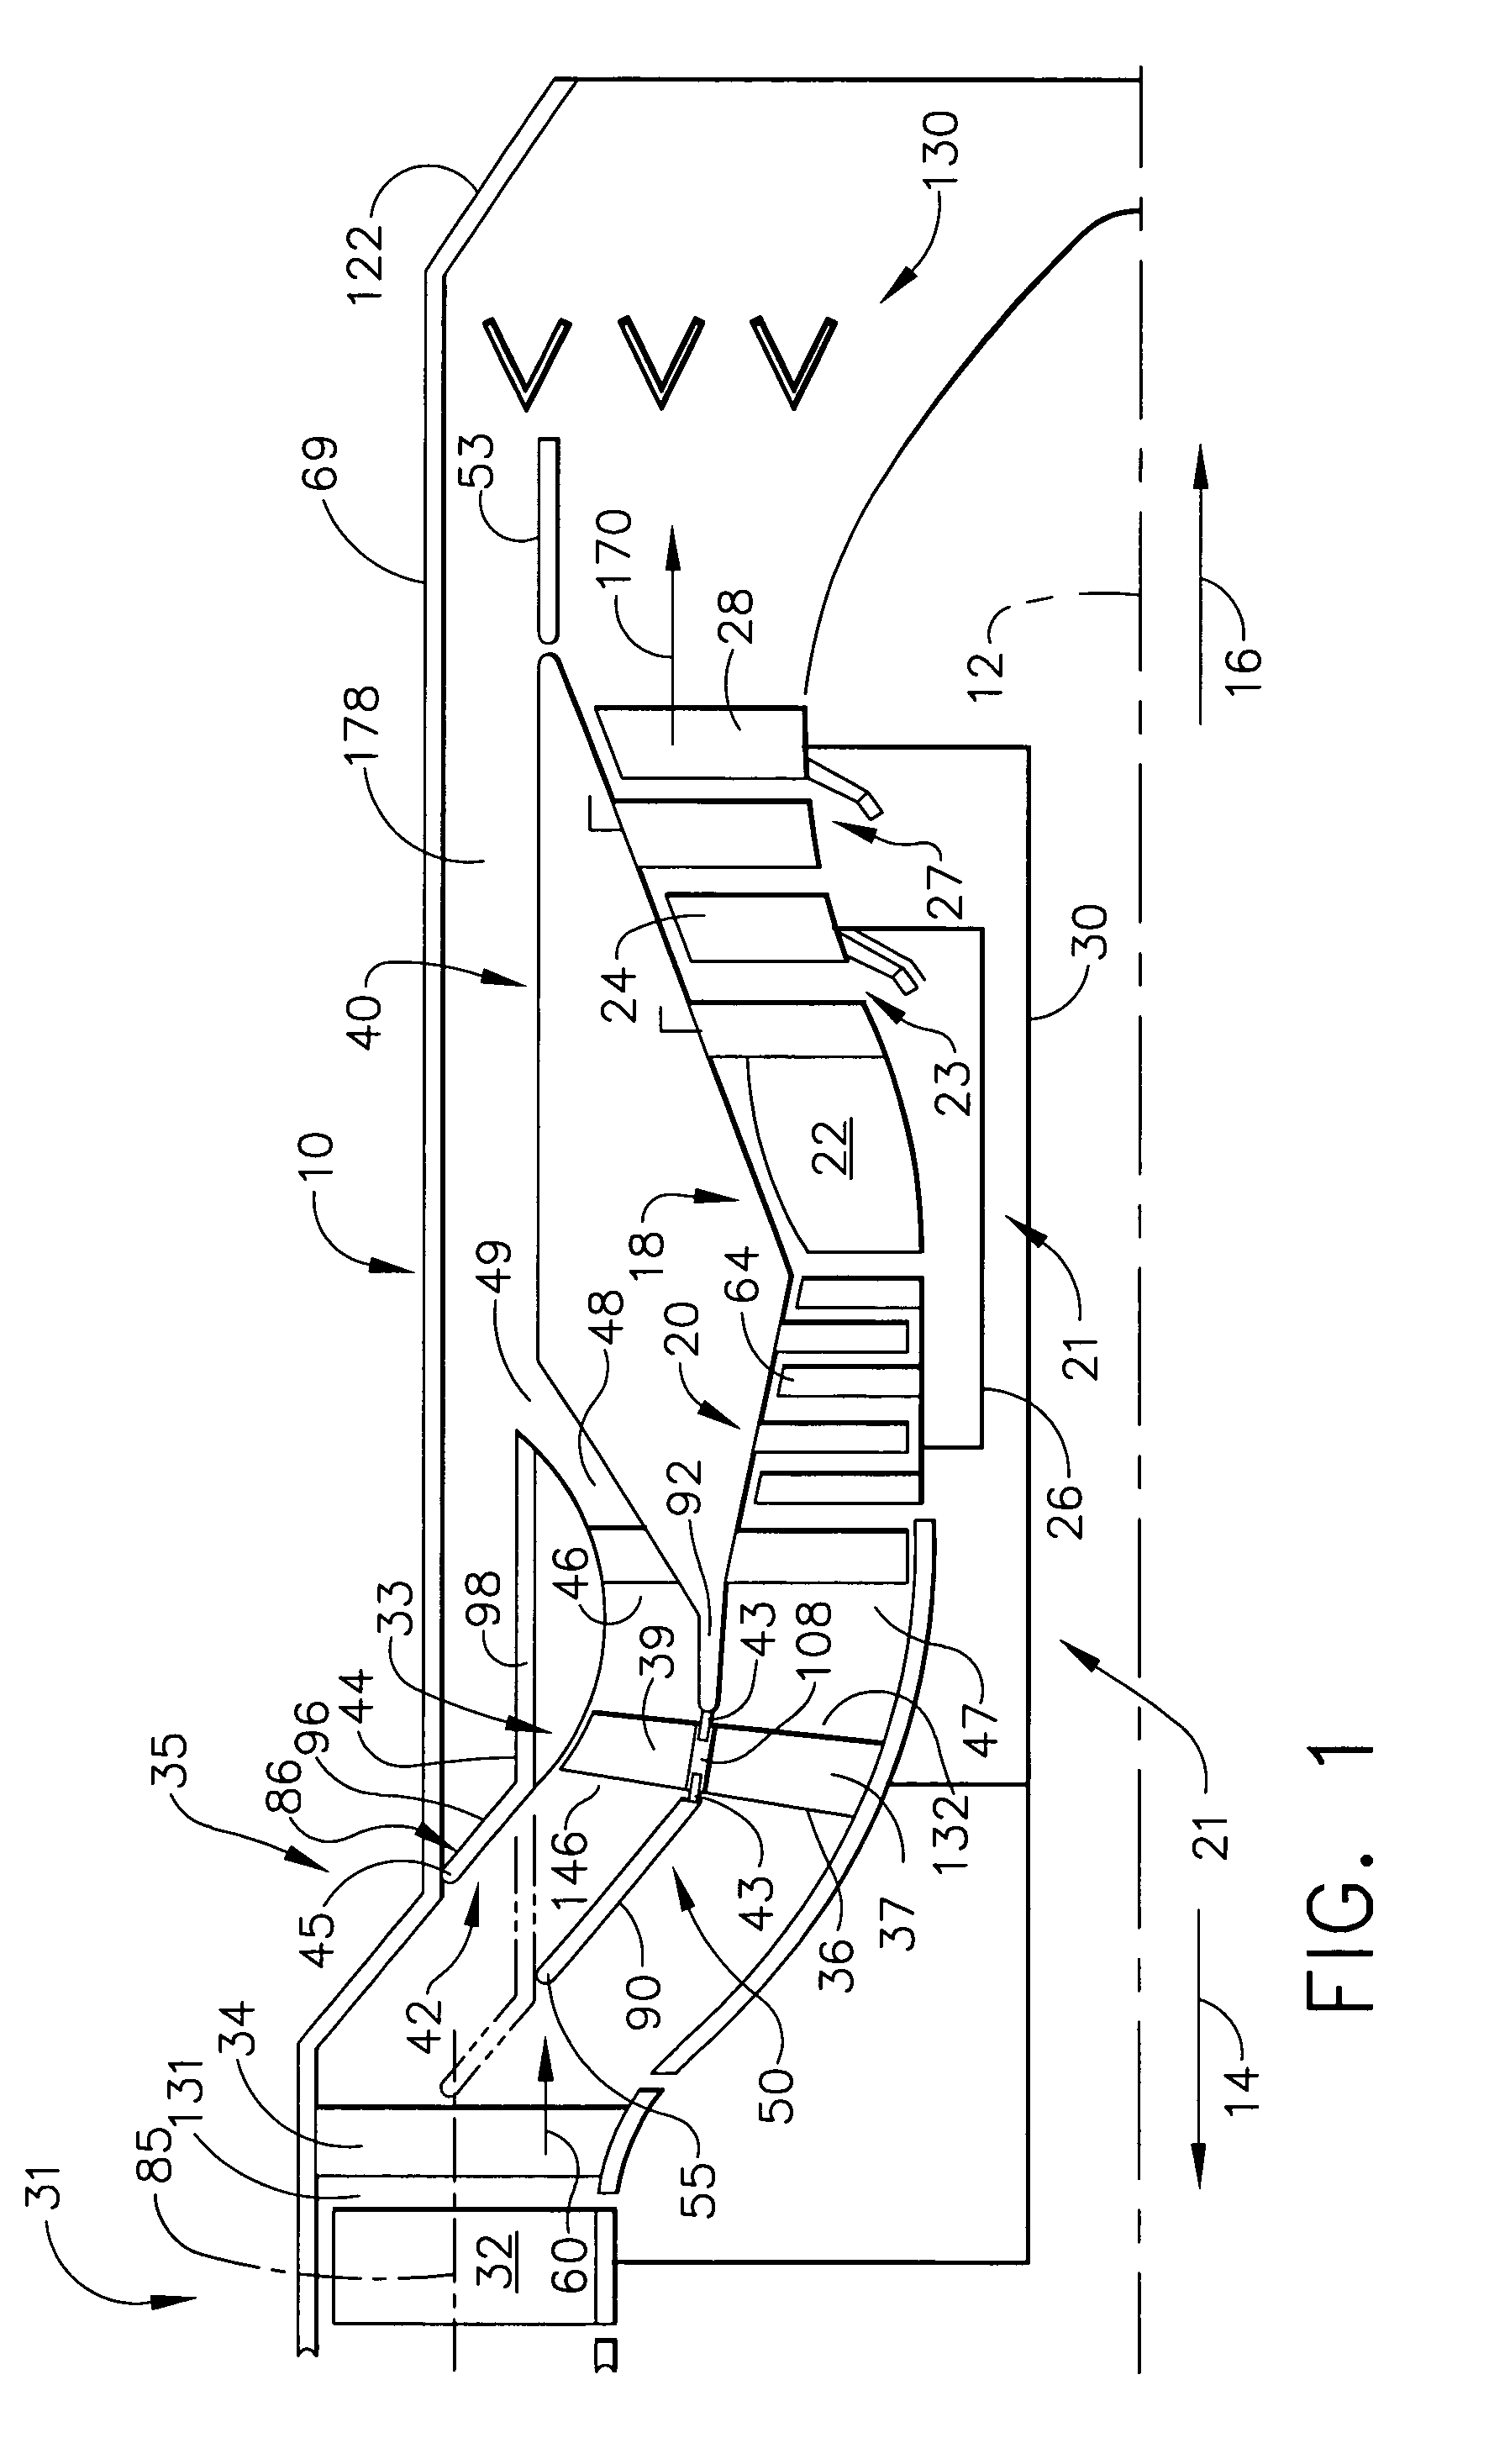 Gas turbine engine with variable pressure ratio fan system